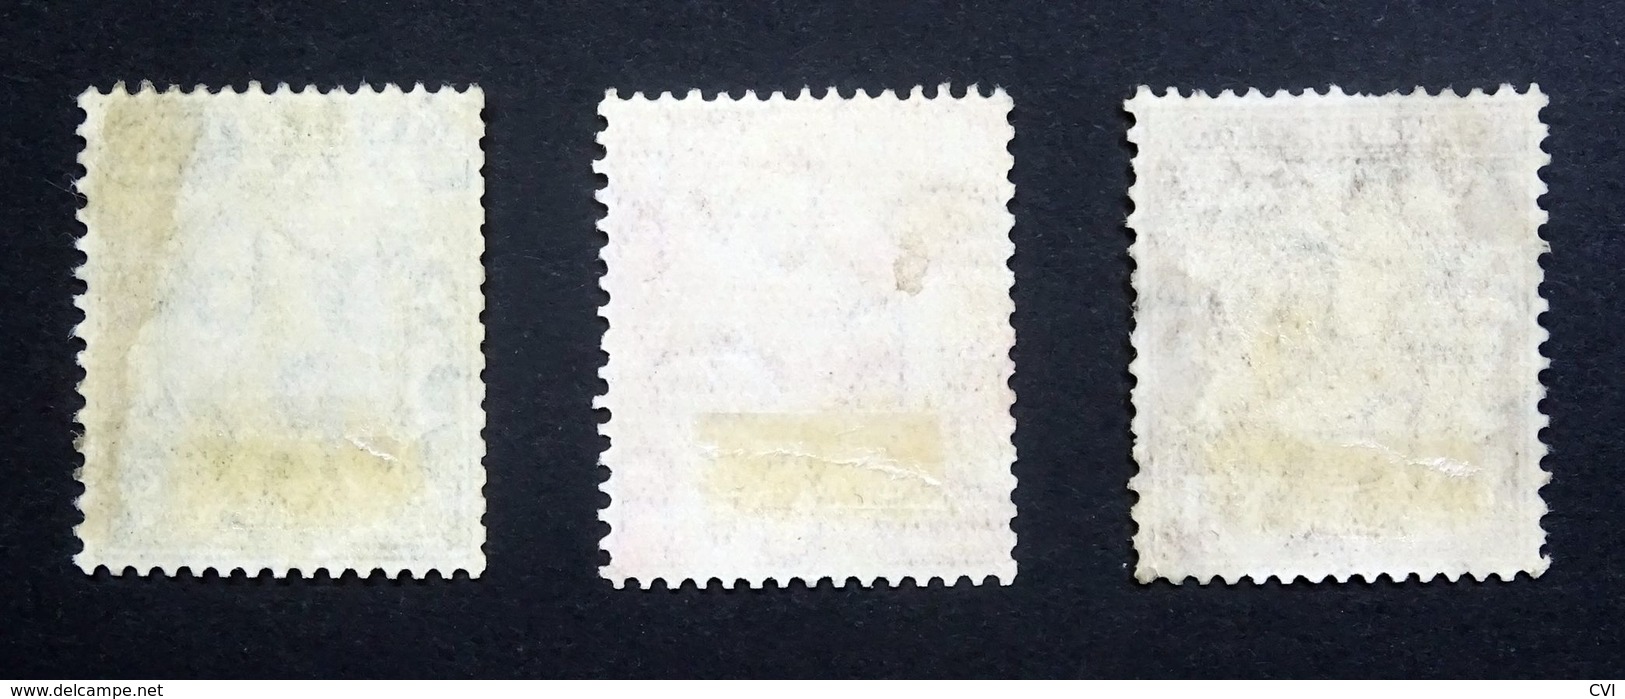 GB KGV 1924-26  SG418,419,420/Sc.#187,188,189  1/2d To 1 1/2d, Wmk 111 Block Cypher INVERTED, Used. (3 Stamps) - Used Stamps